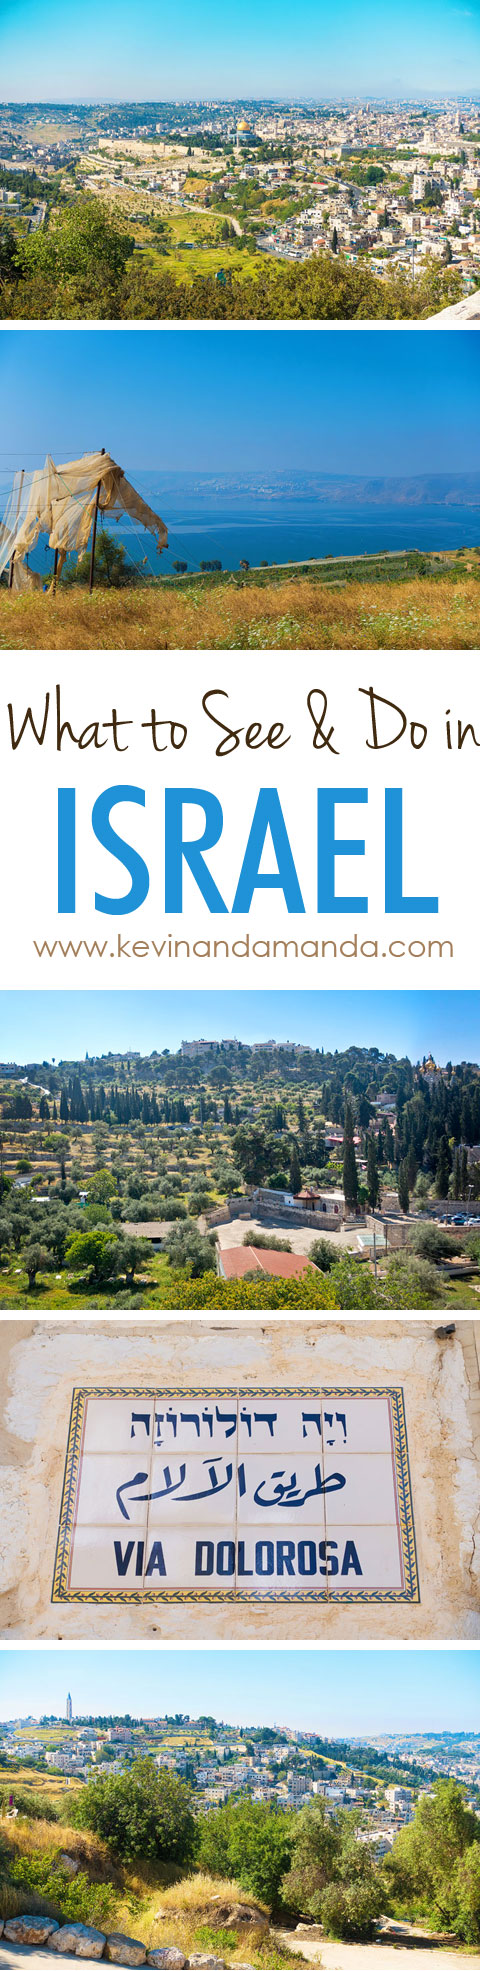 A checklist for the must-see Most Holy Places in Jerusalem, including The Sea of Galilee, the Via Dolorosa, Mount of Olives, Garden of Gethsemane, Church of the Holy Sepulcher. Tips for Traveling to Israel + Where to Eat and Where to Stay in Jerusalem.